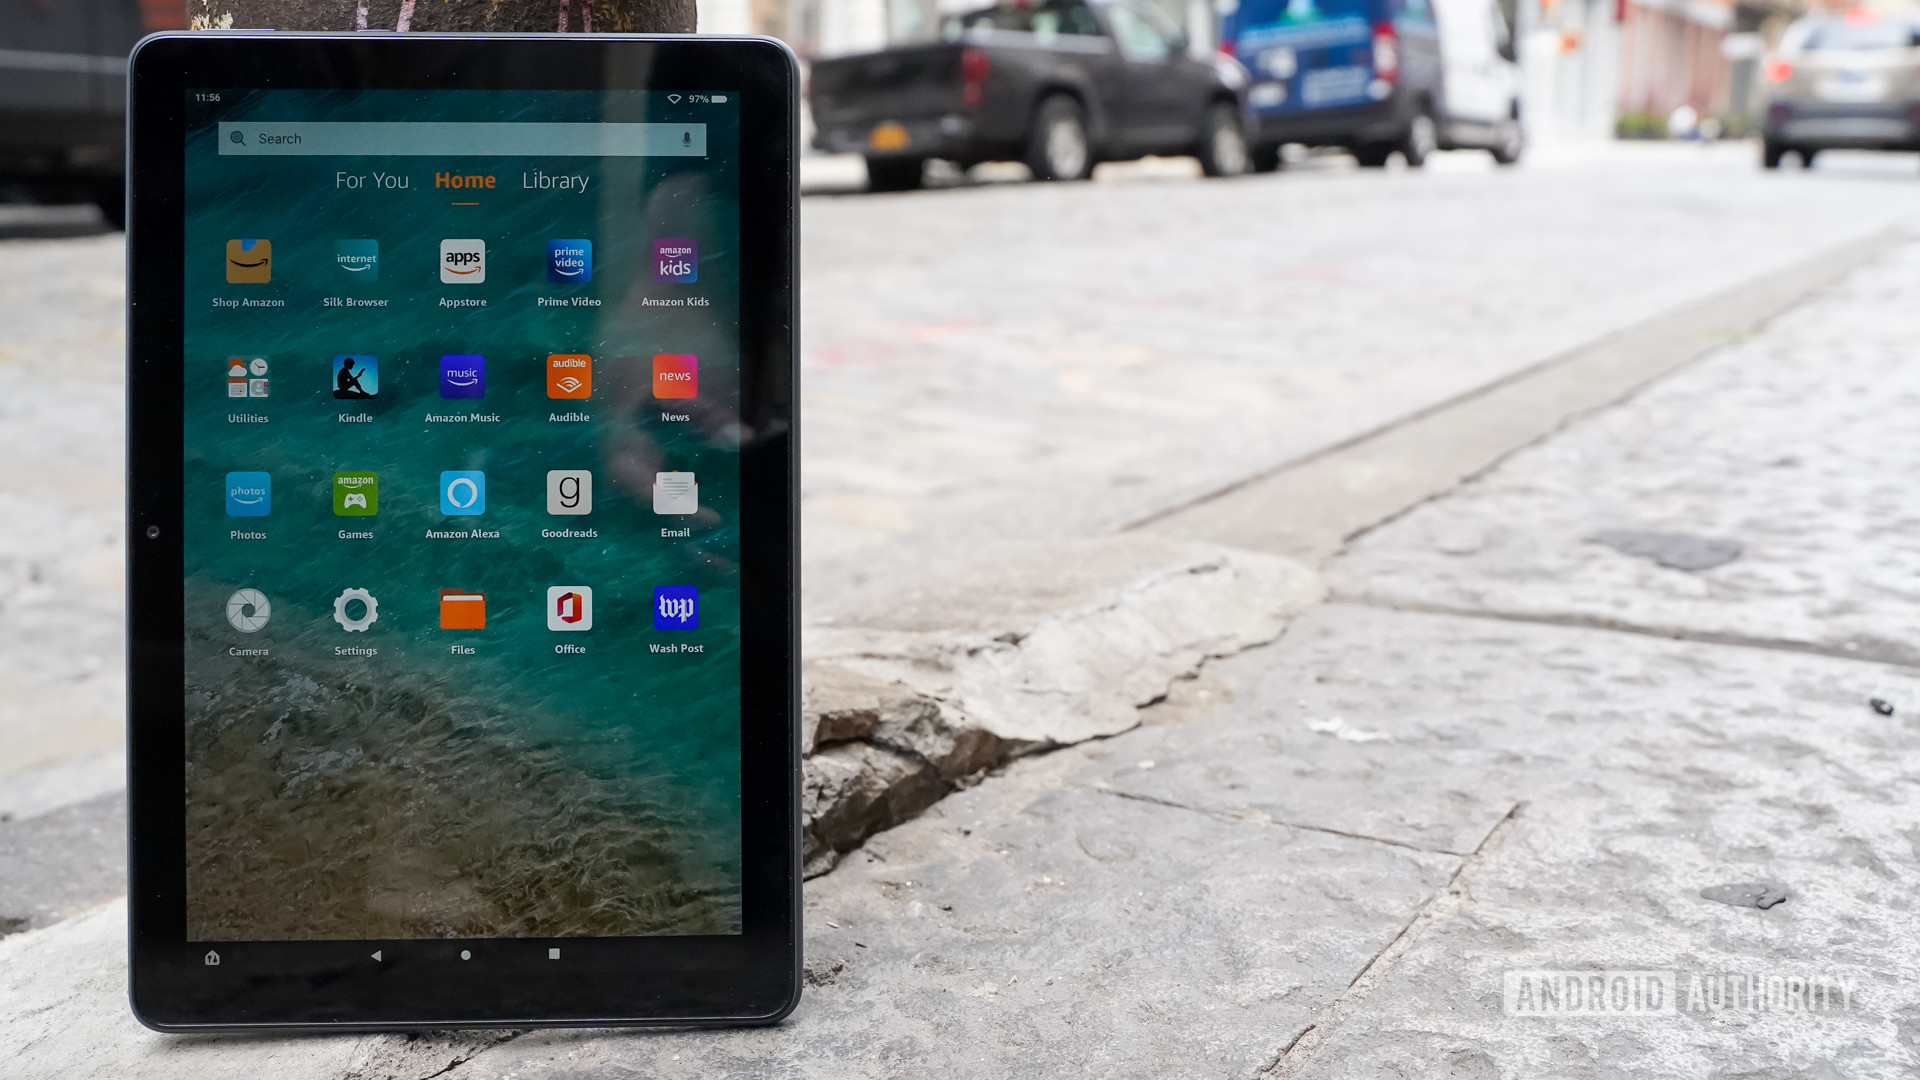 Amazon Fire HD 10 Plus standing on the street